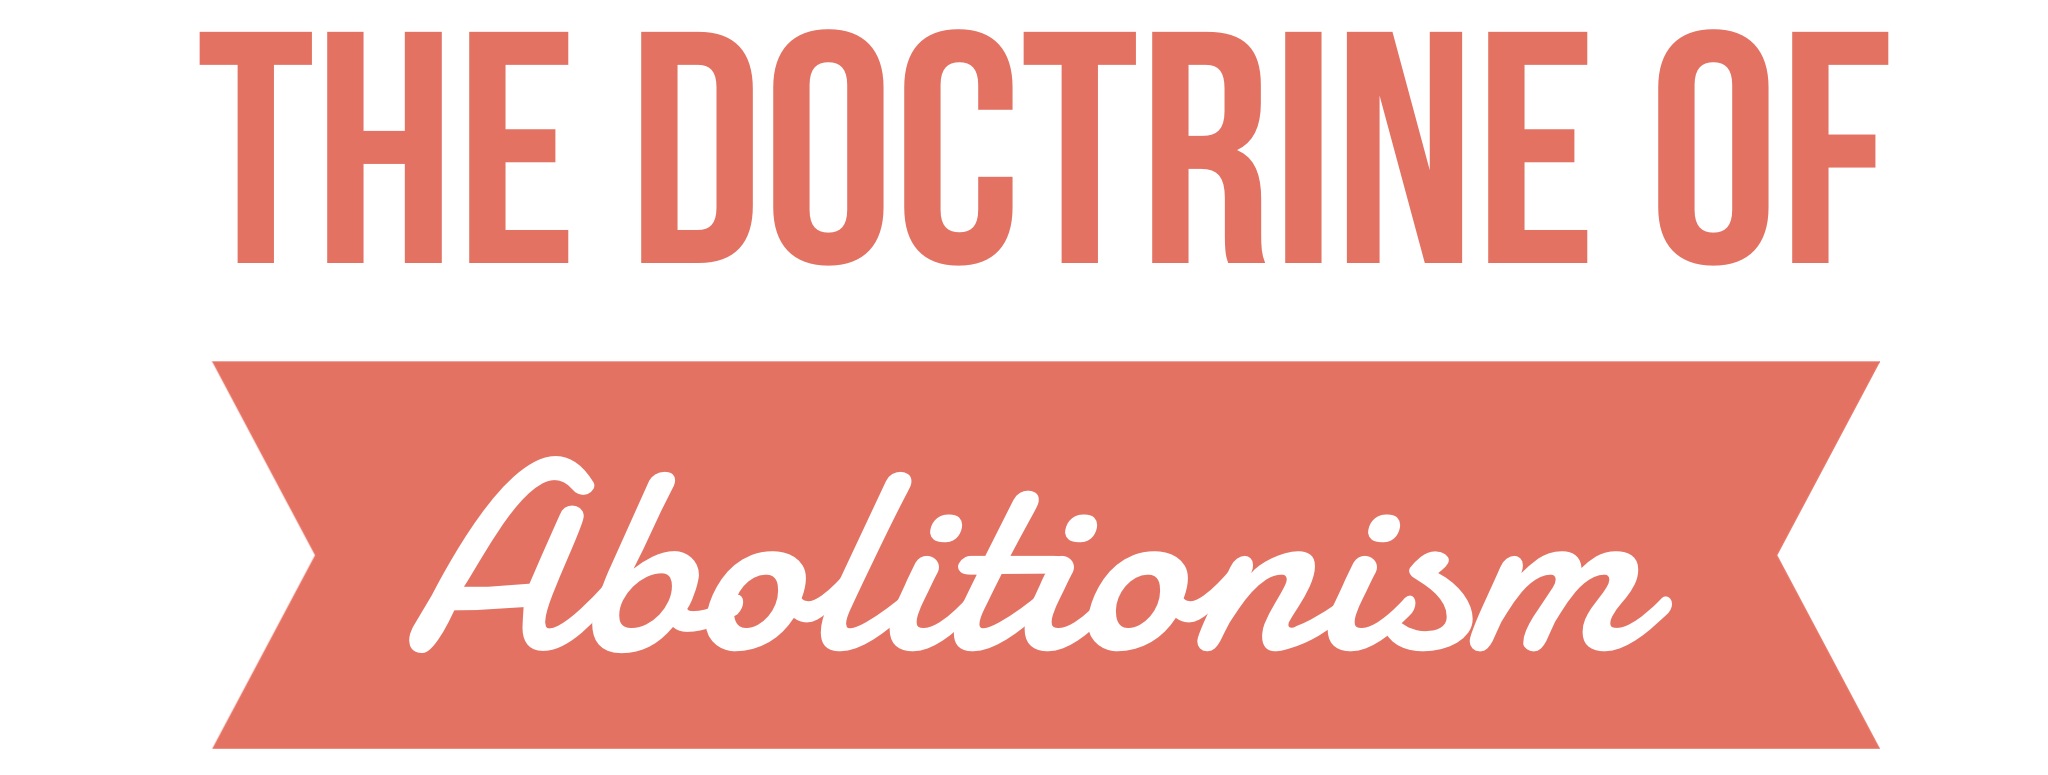 The Doctrine of Abolitionism